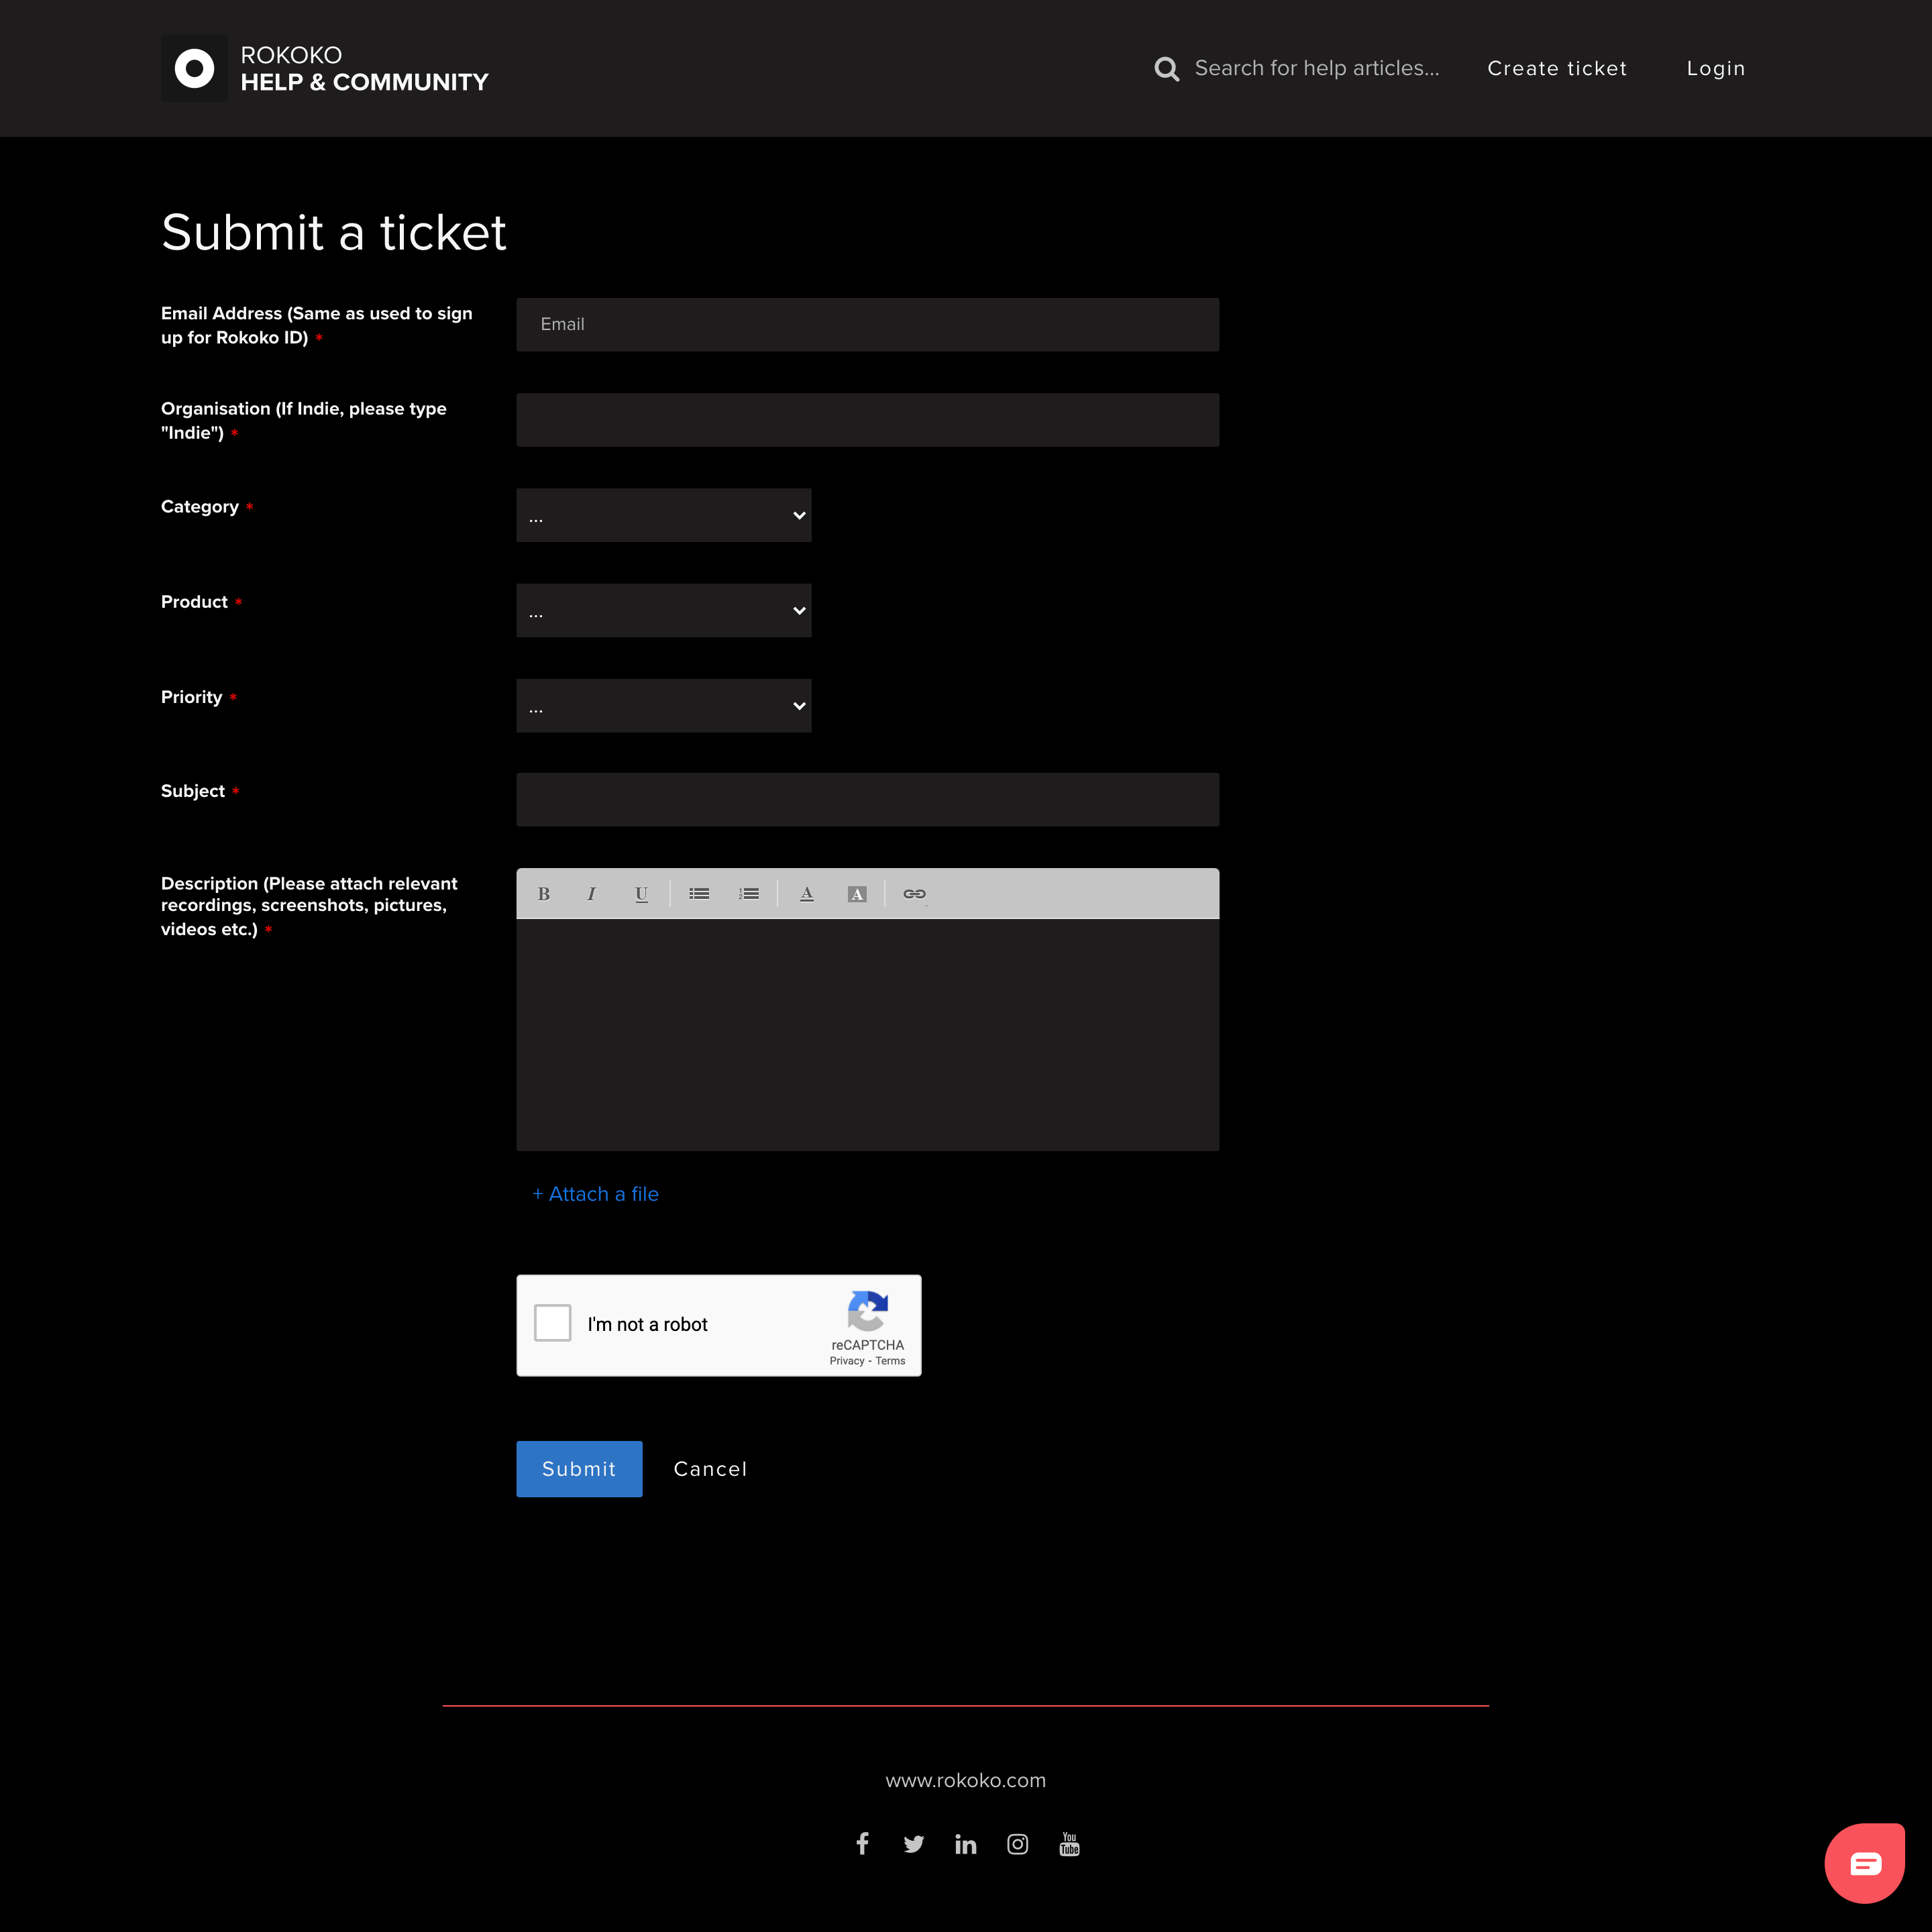 Dark-Freshdesk-theme-for-Rokoko-homepage-submit-a-request-page